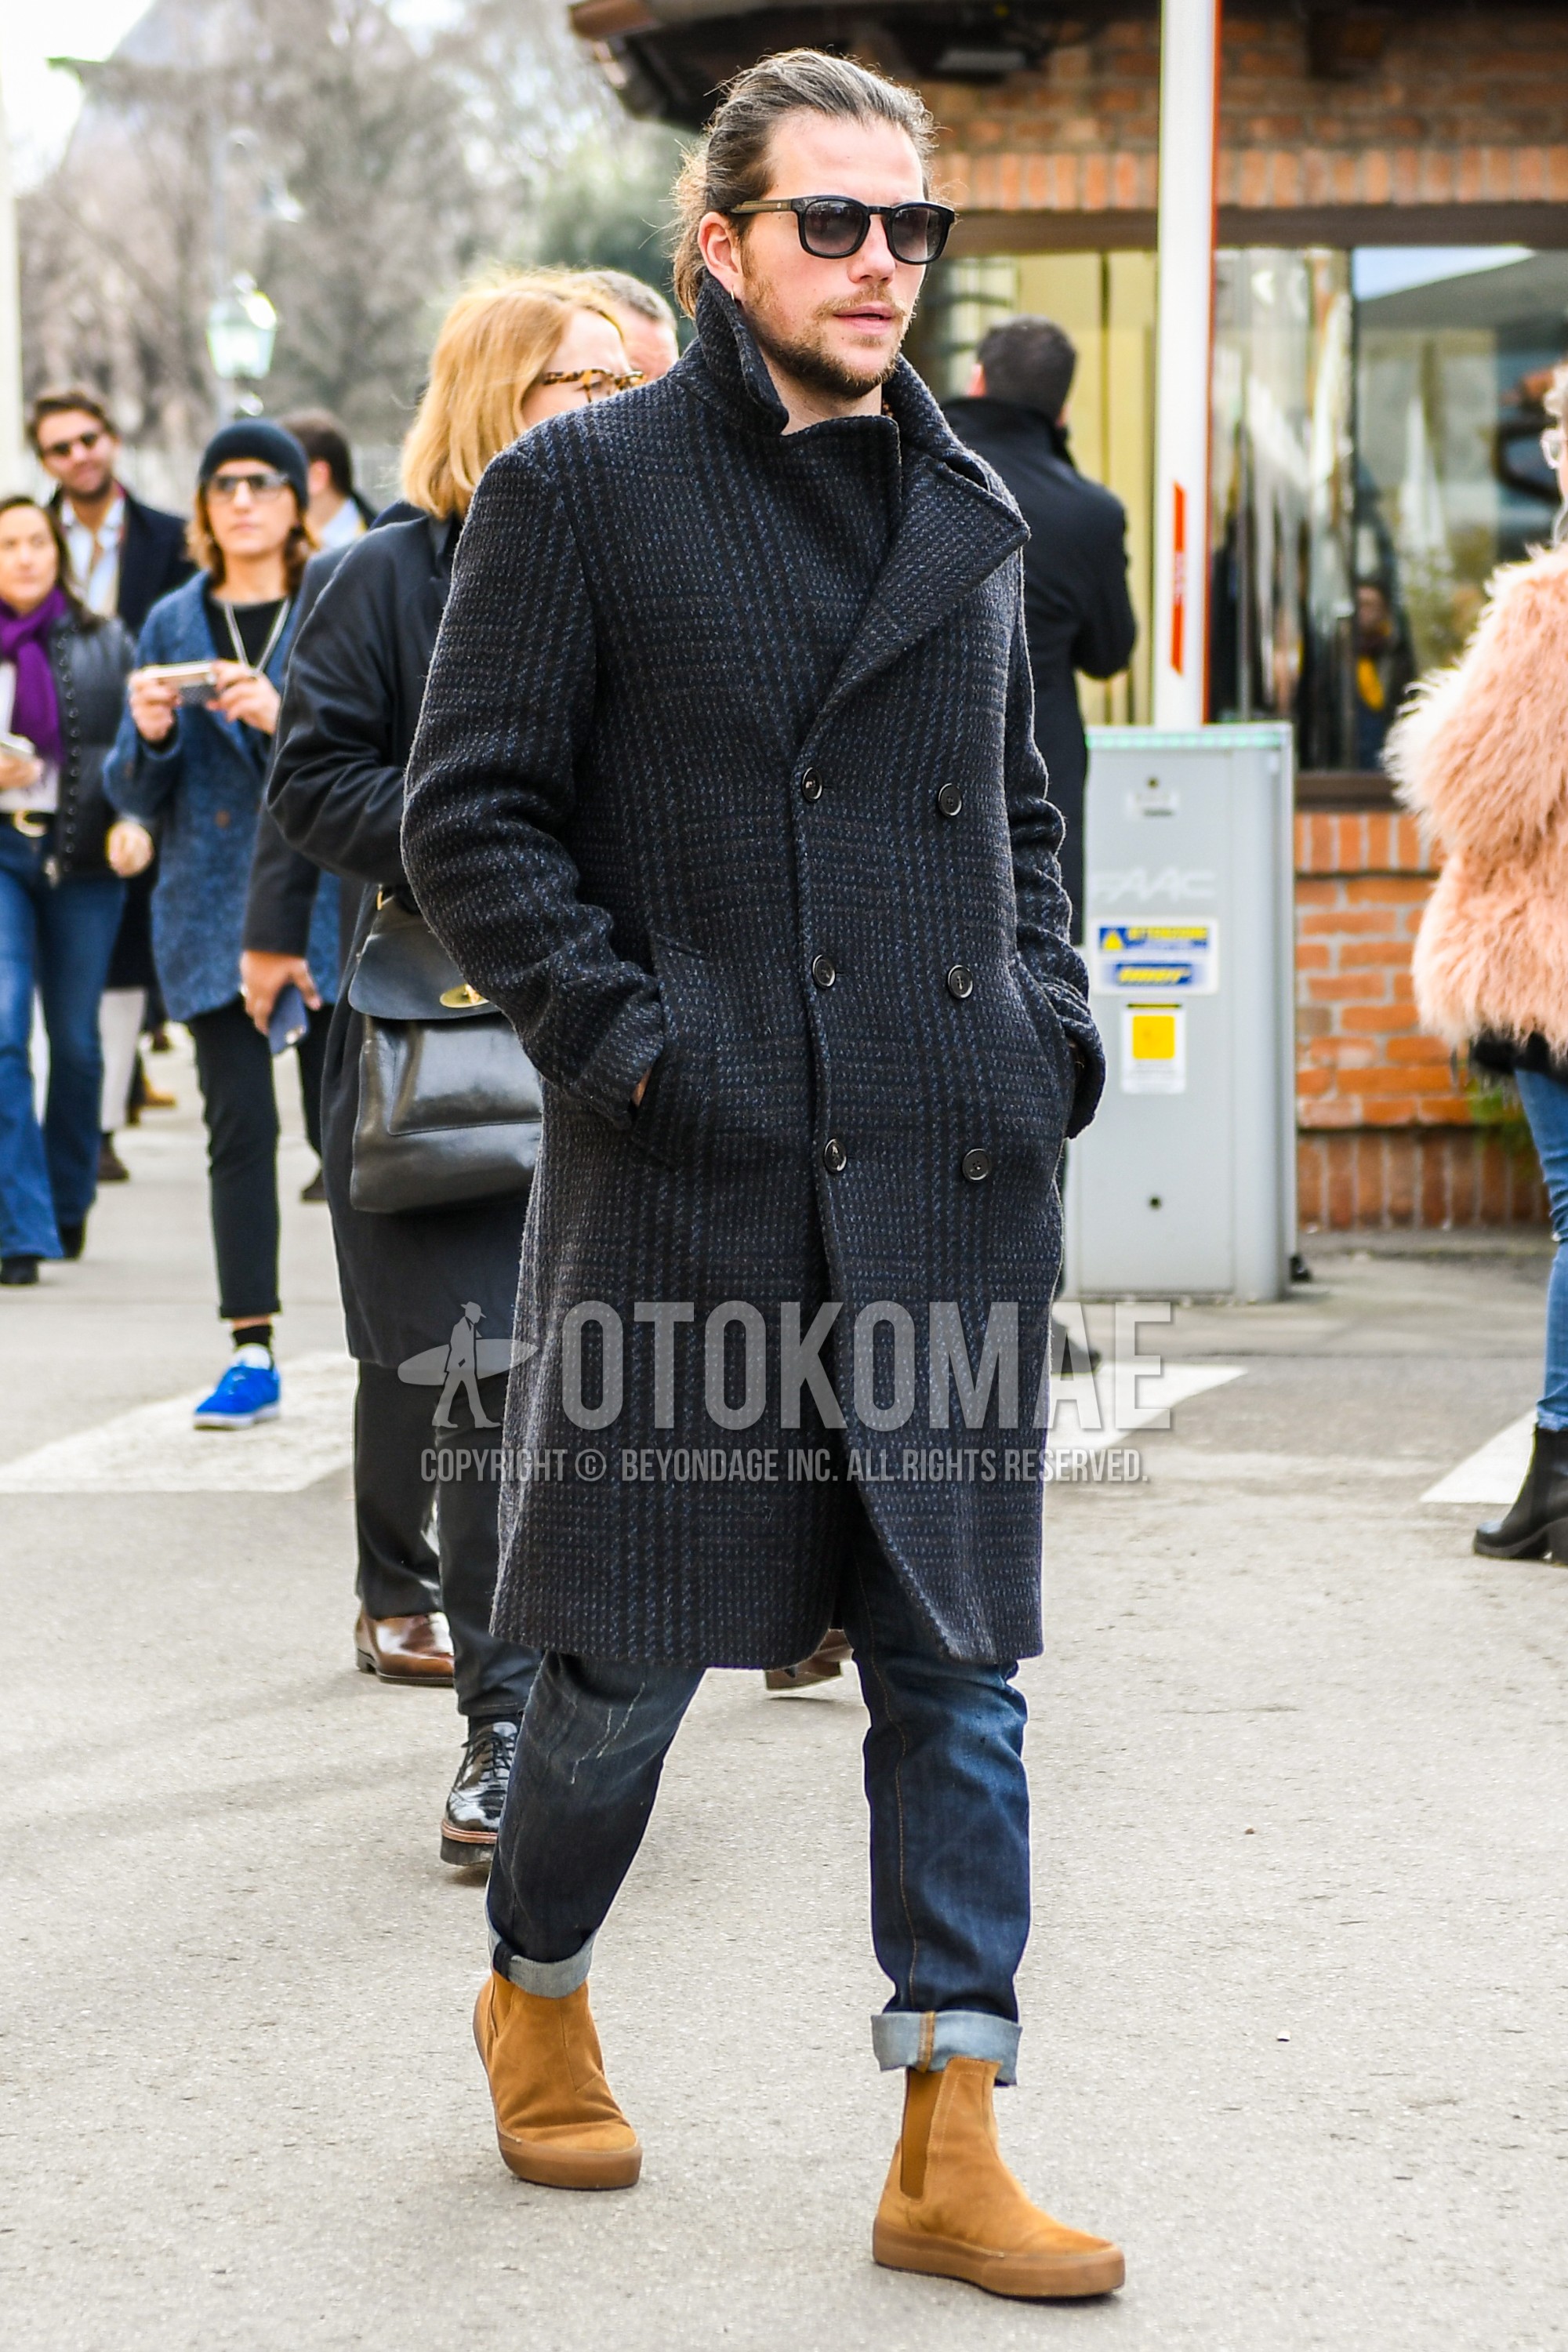 Men's winter outfit with black plain sunglasses, dark gray check ulster coat, navy plain denim/jeans, beige side-gore boots.